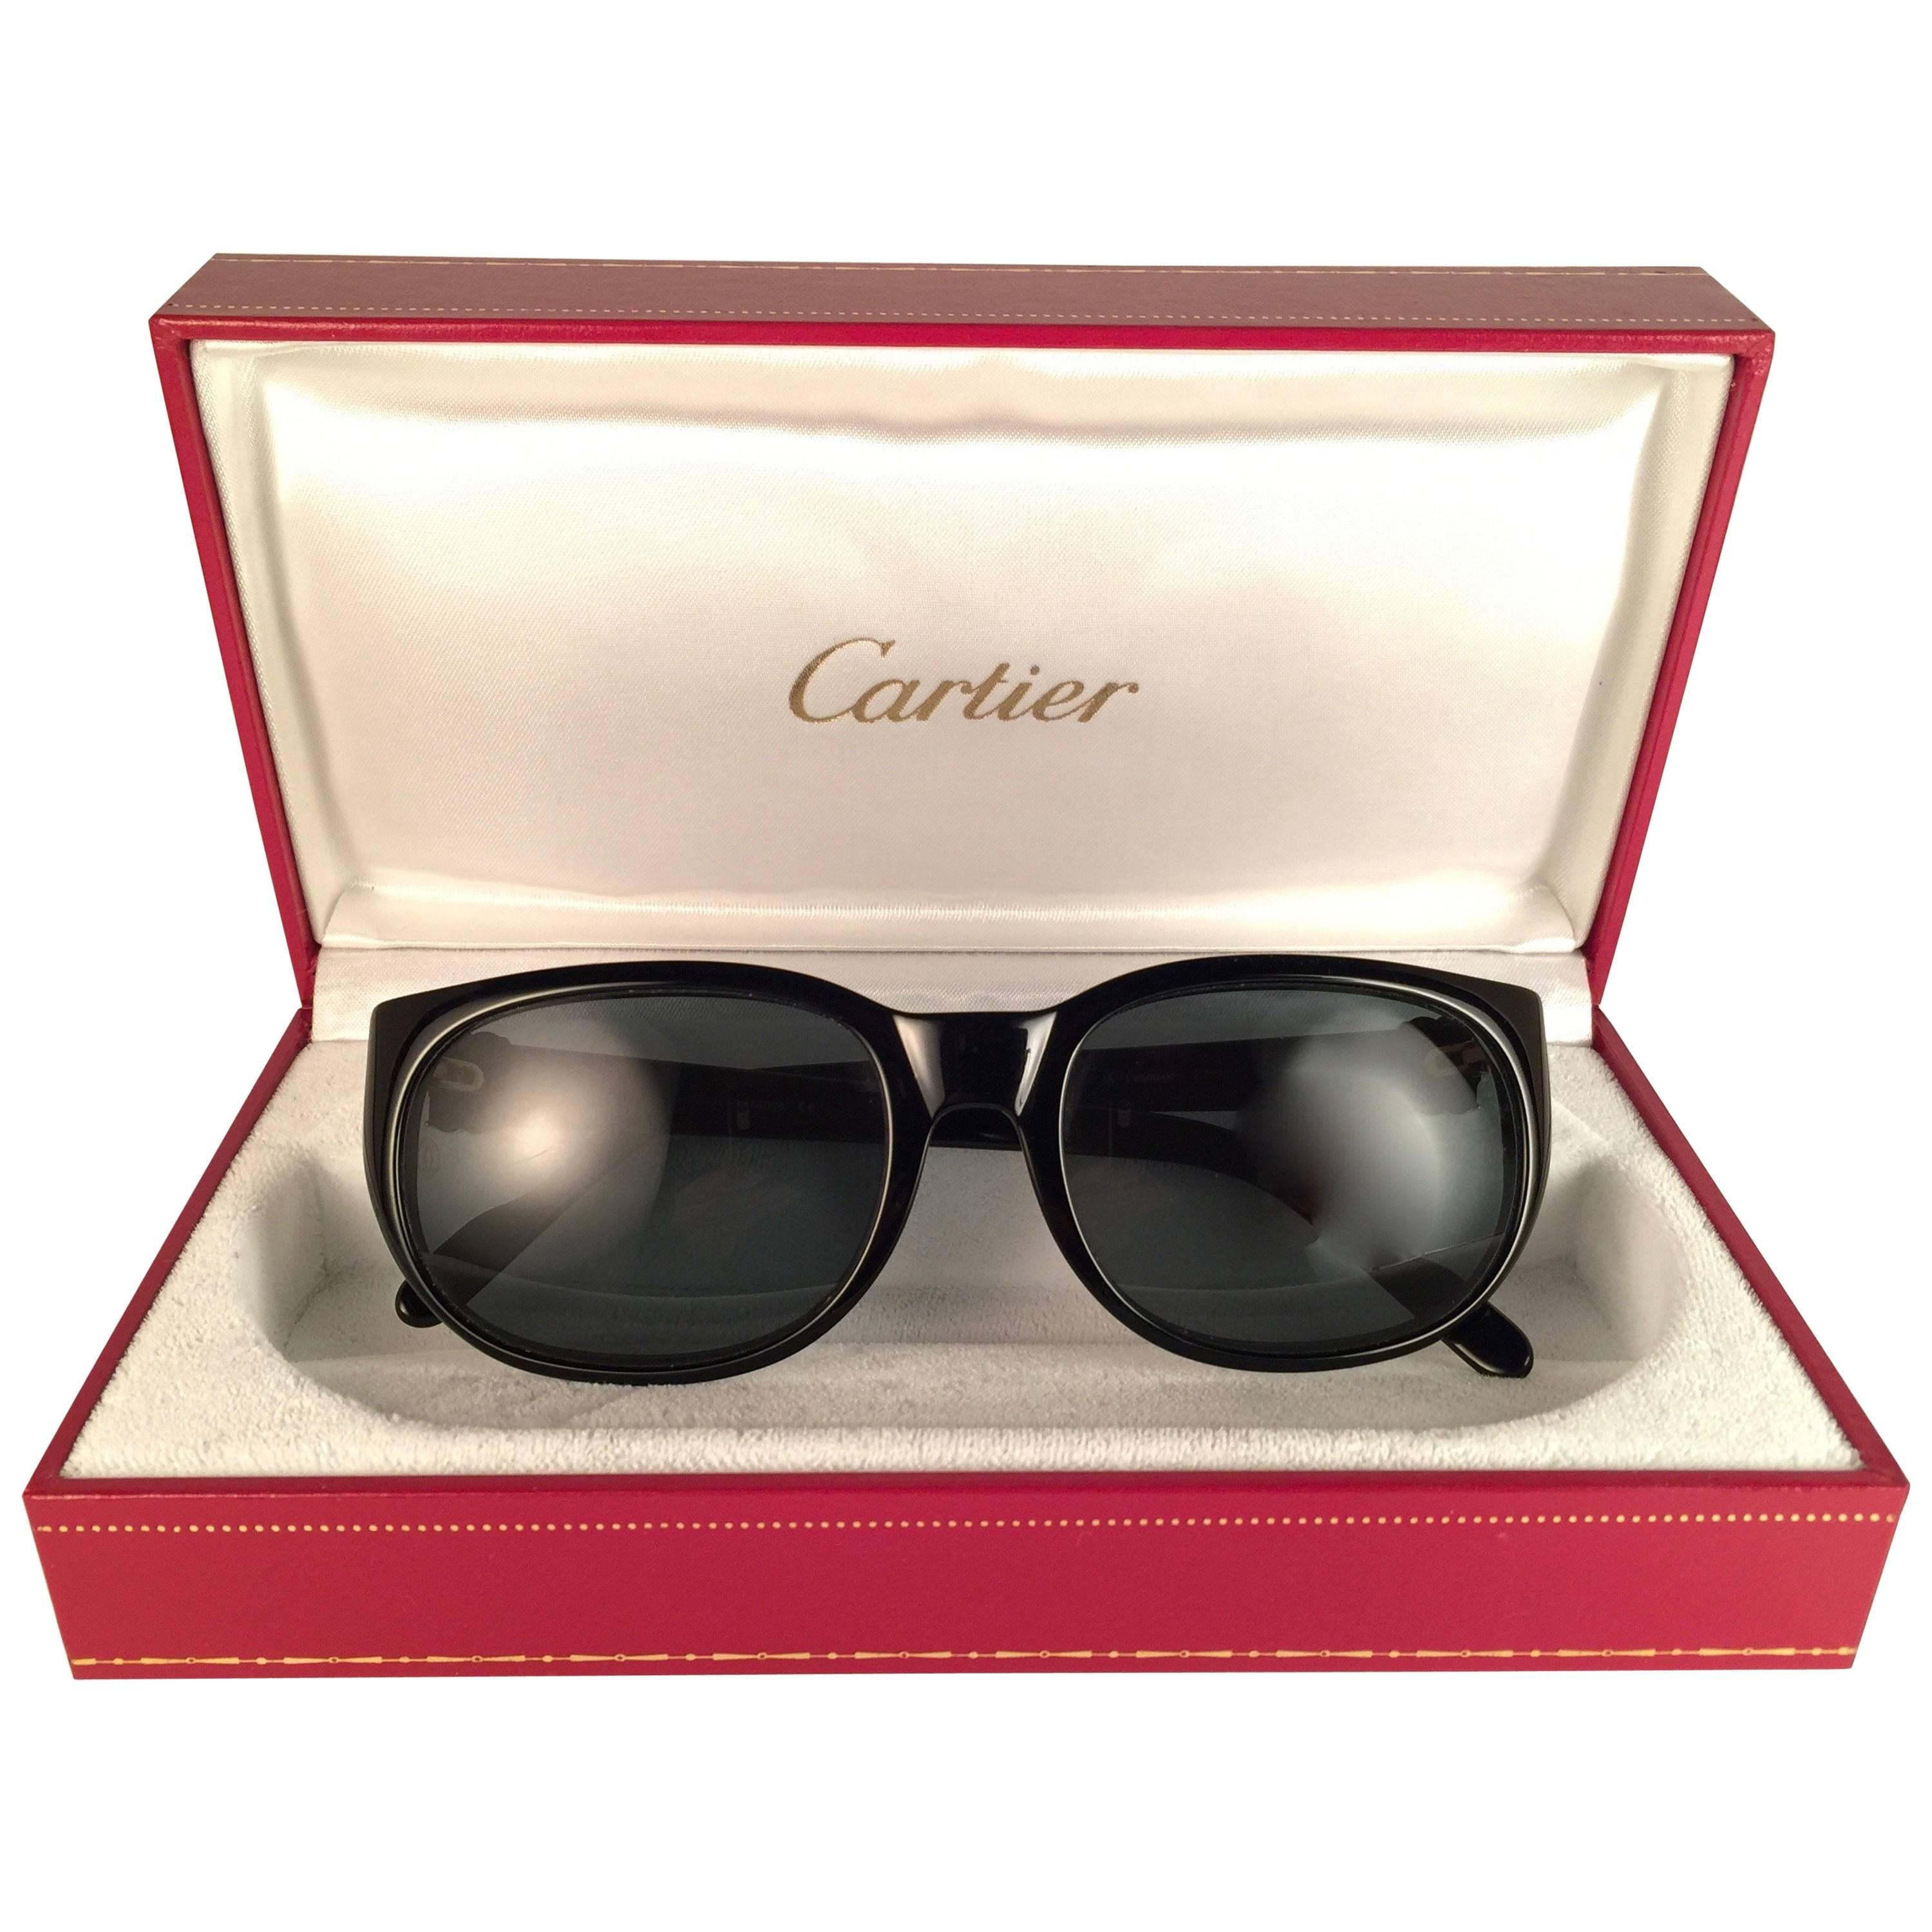 New Vintage Cartier Trinity Black 18k Gold Plated Accents France 1990 sunglasses